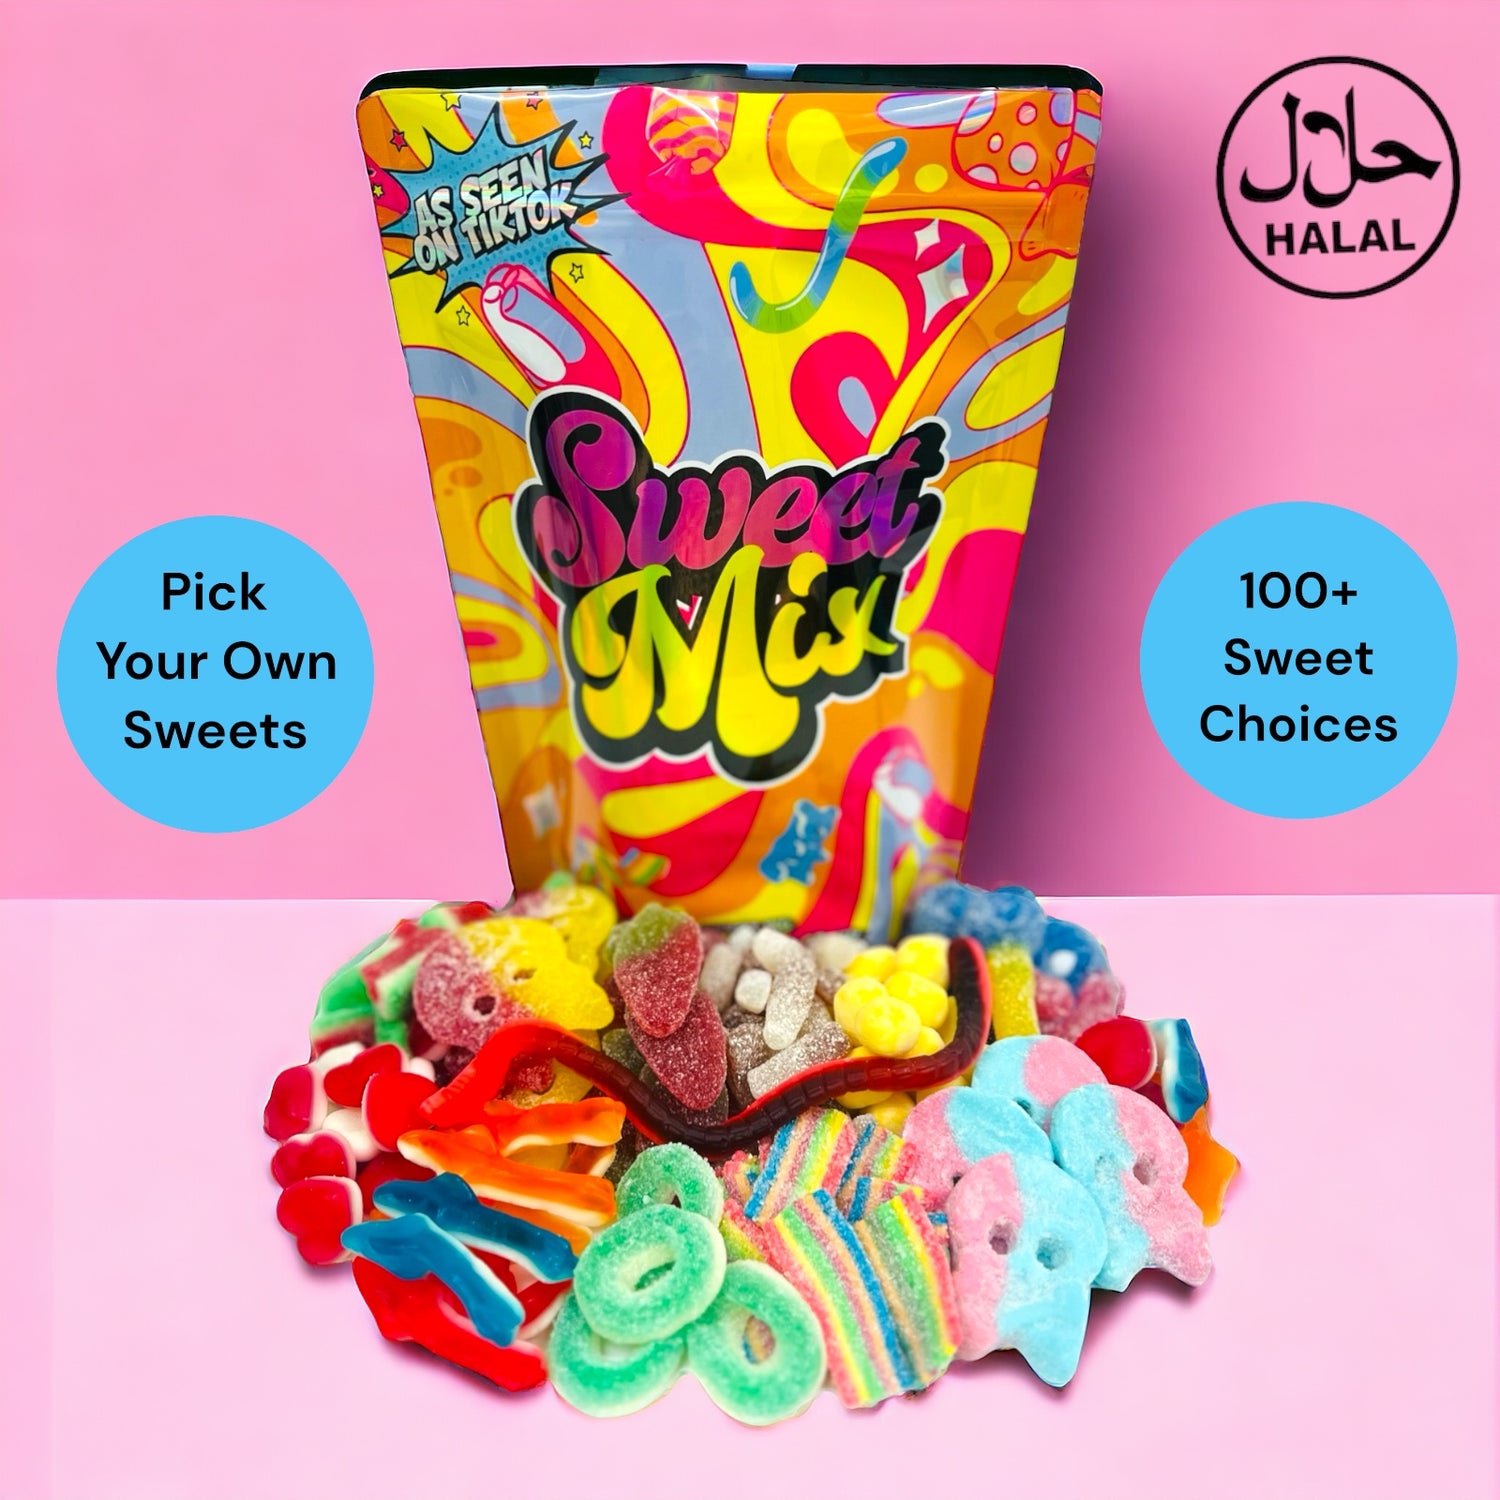 Halal pick and mix front 